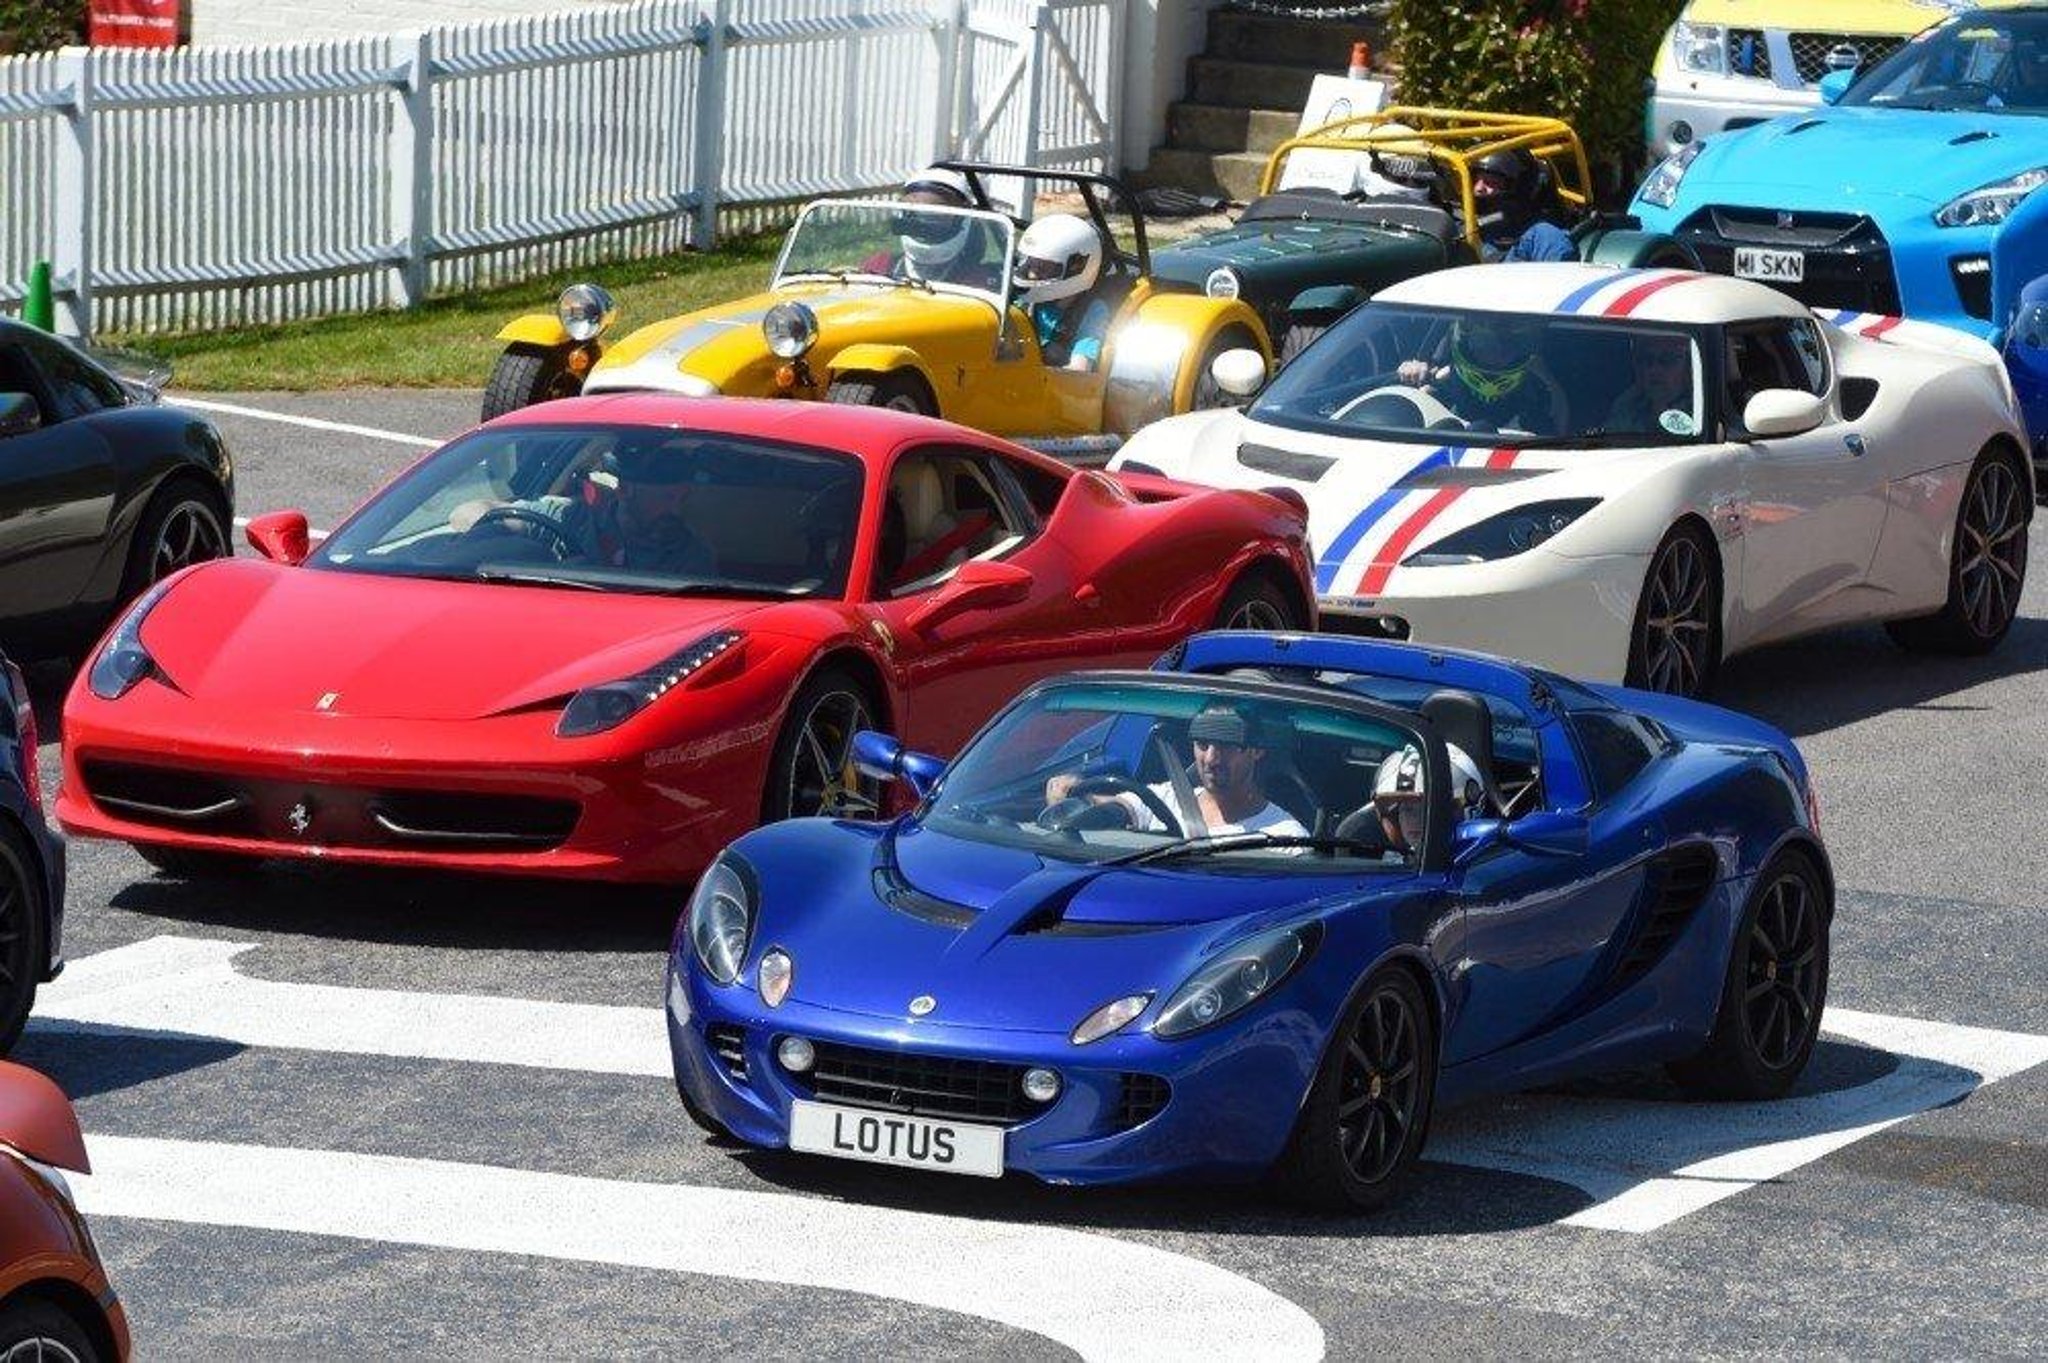 Goodwood to welcome world's best supercars for Children's Trust fundraiser
